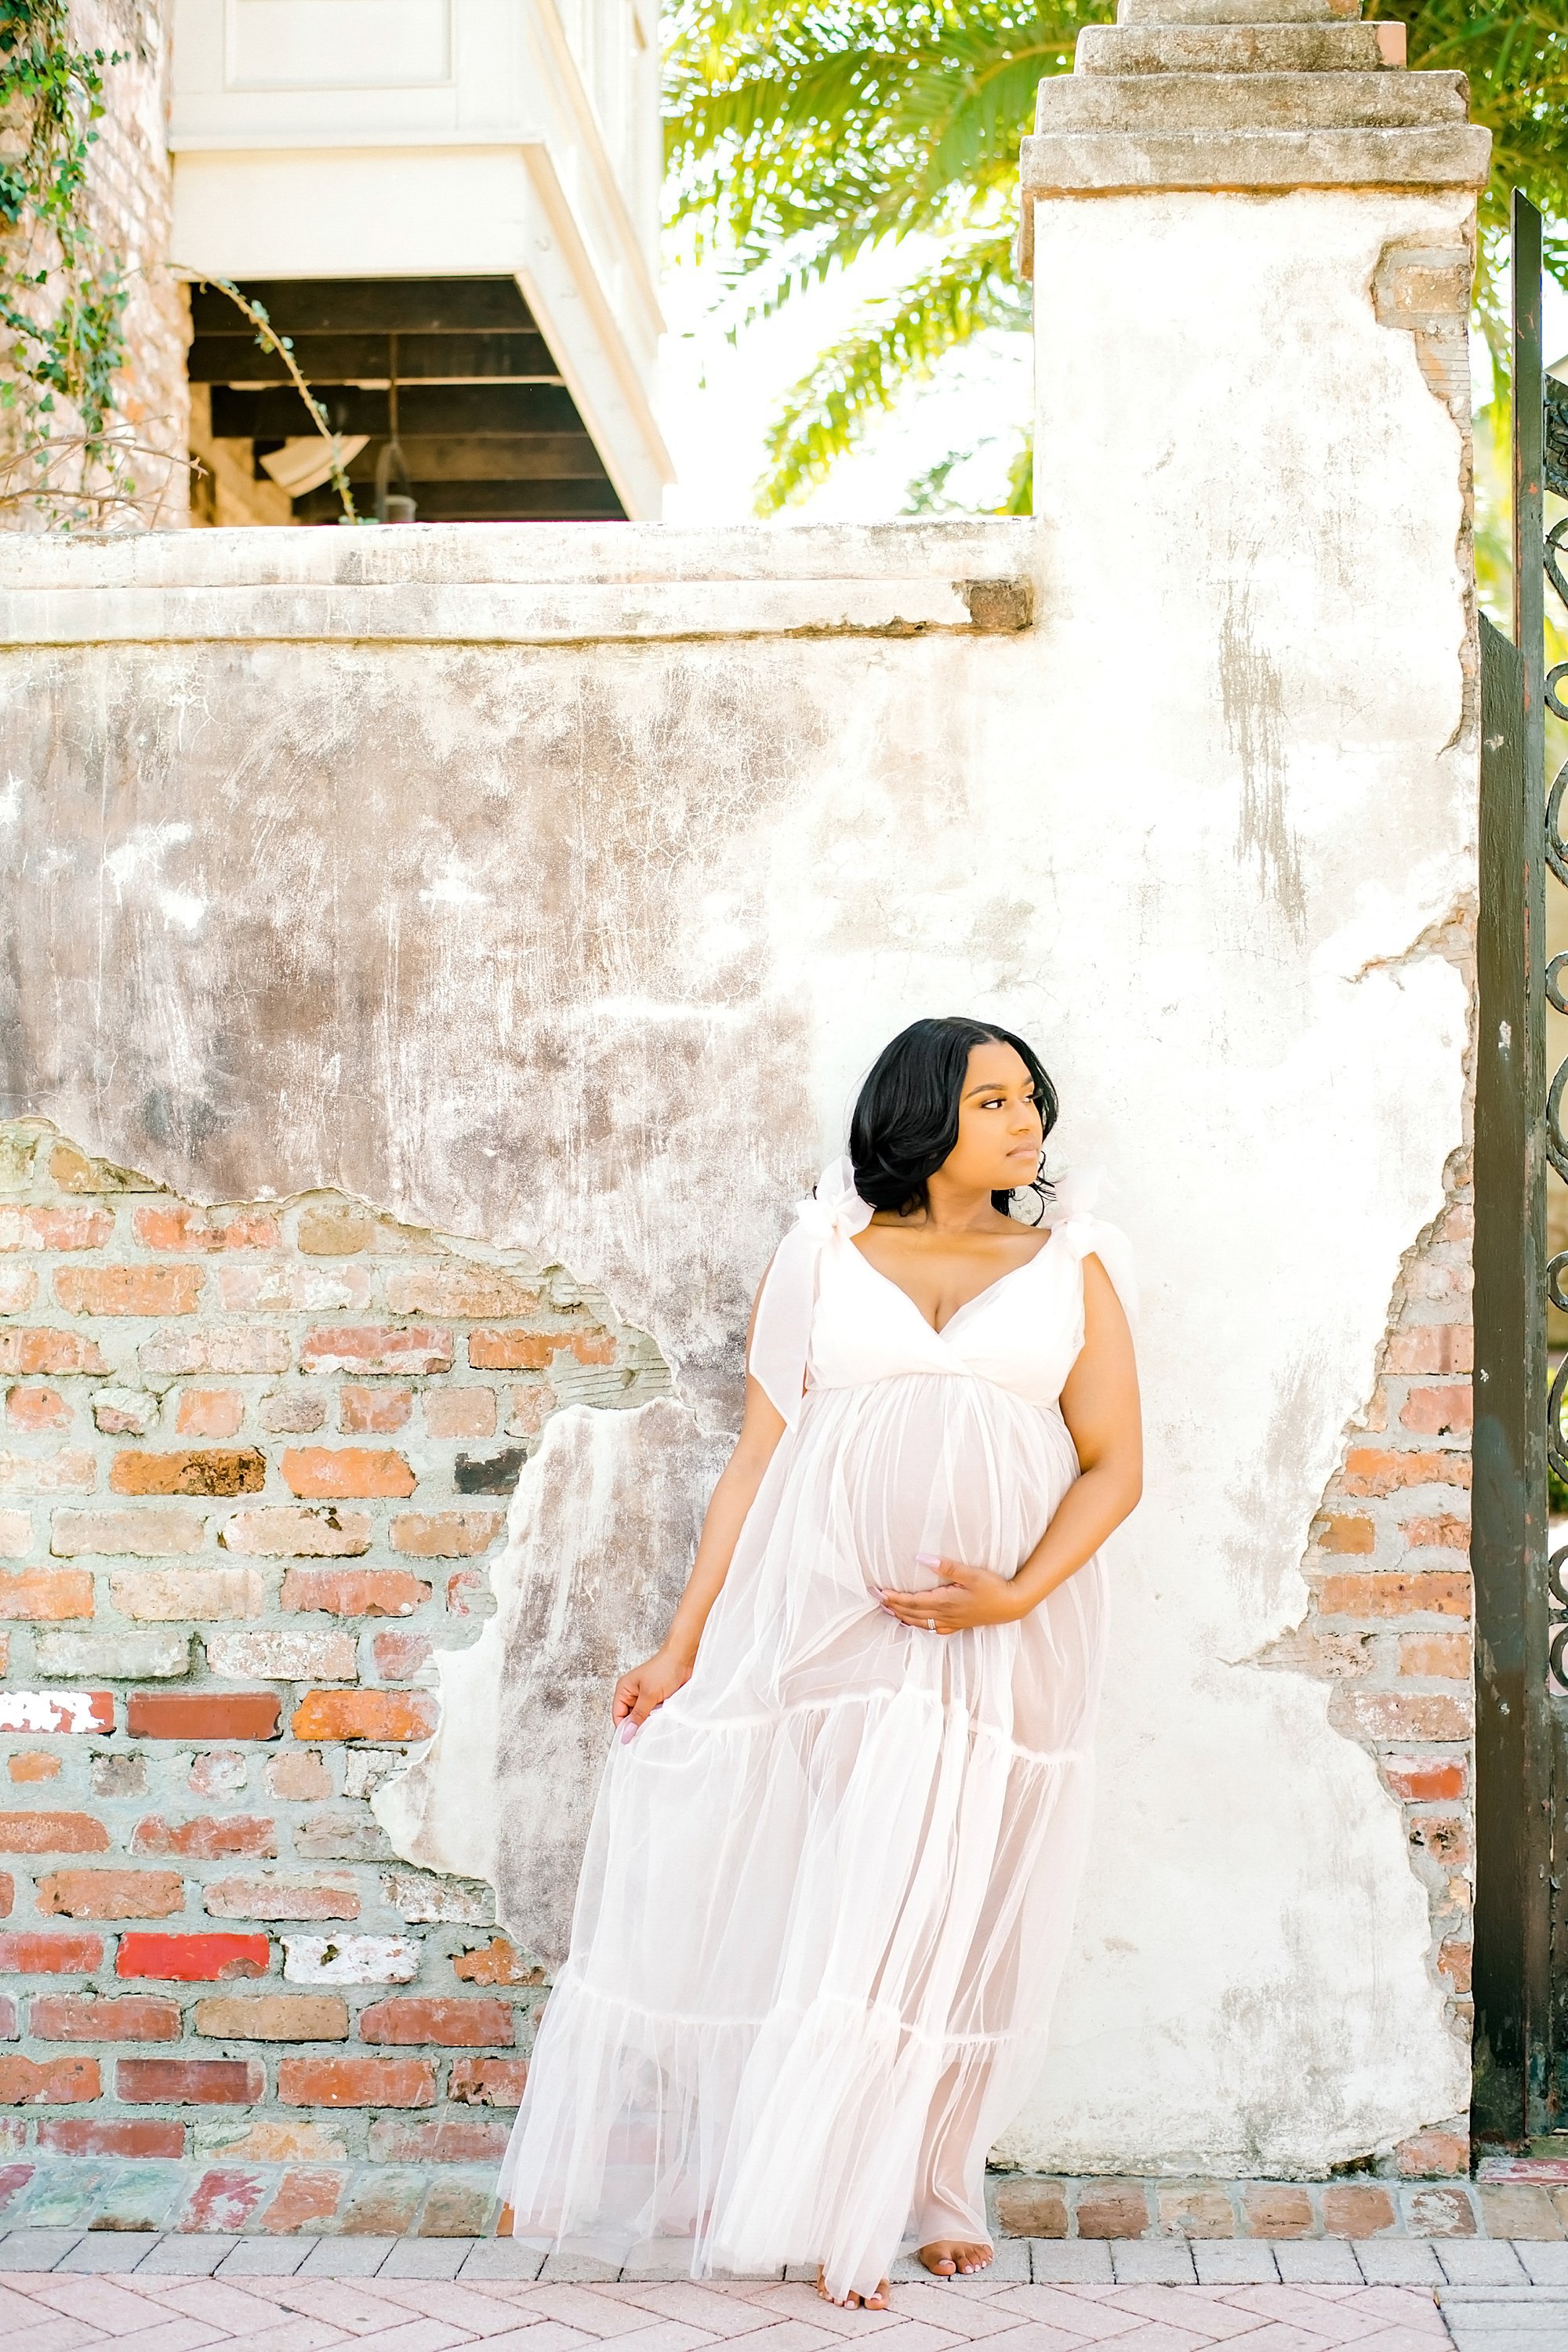 French Quarter Engagement Shoot-New Orleans French Quarter-New Orleans Photographer_0692.jpg